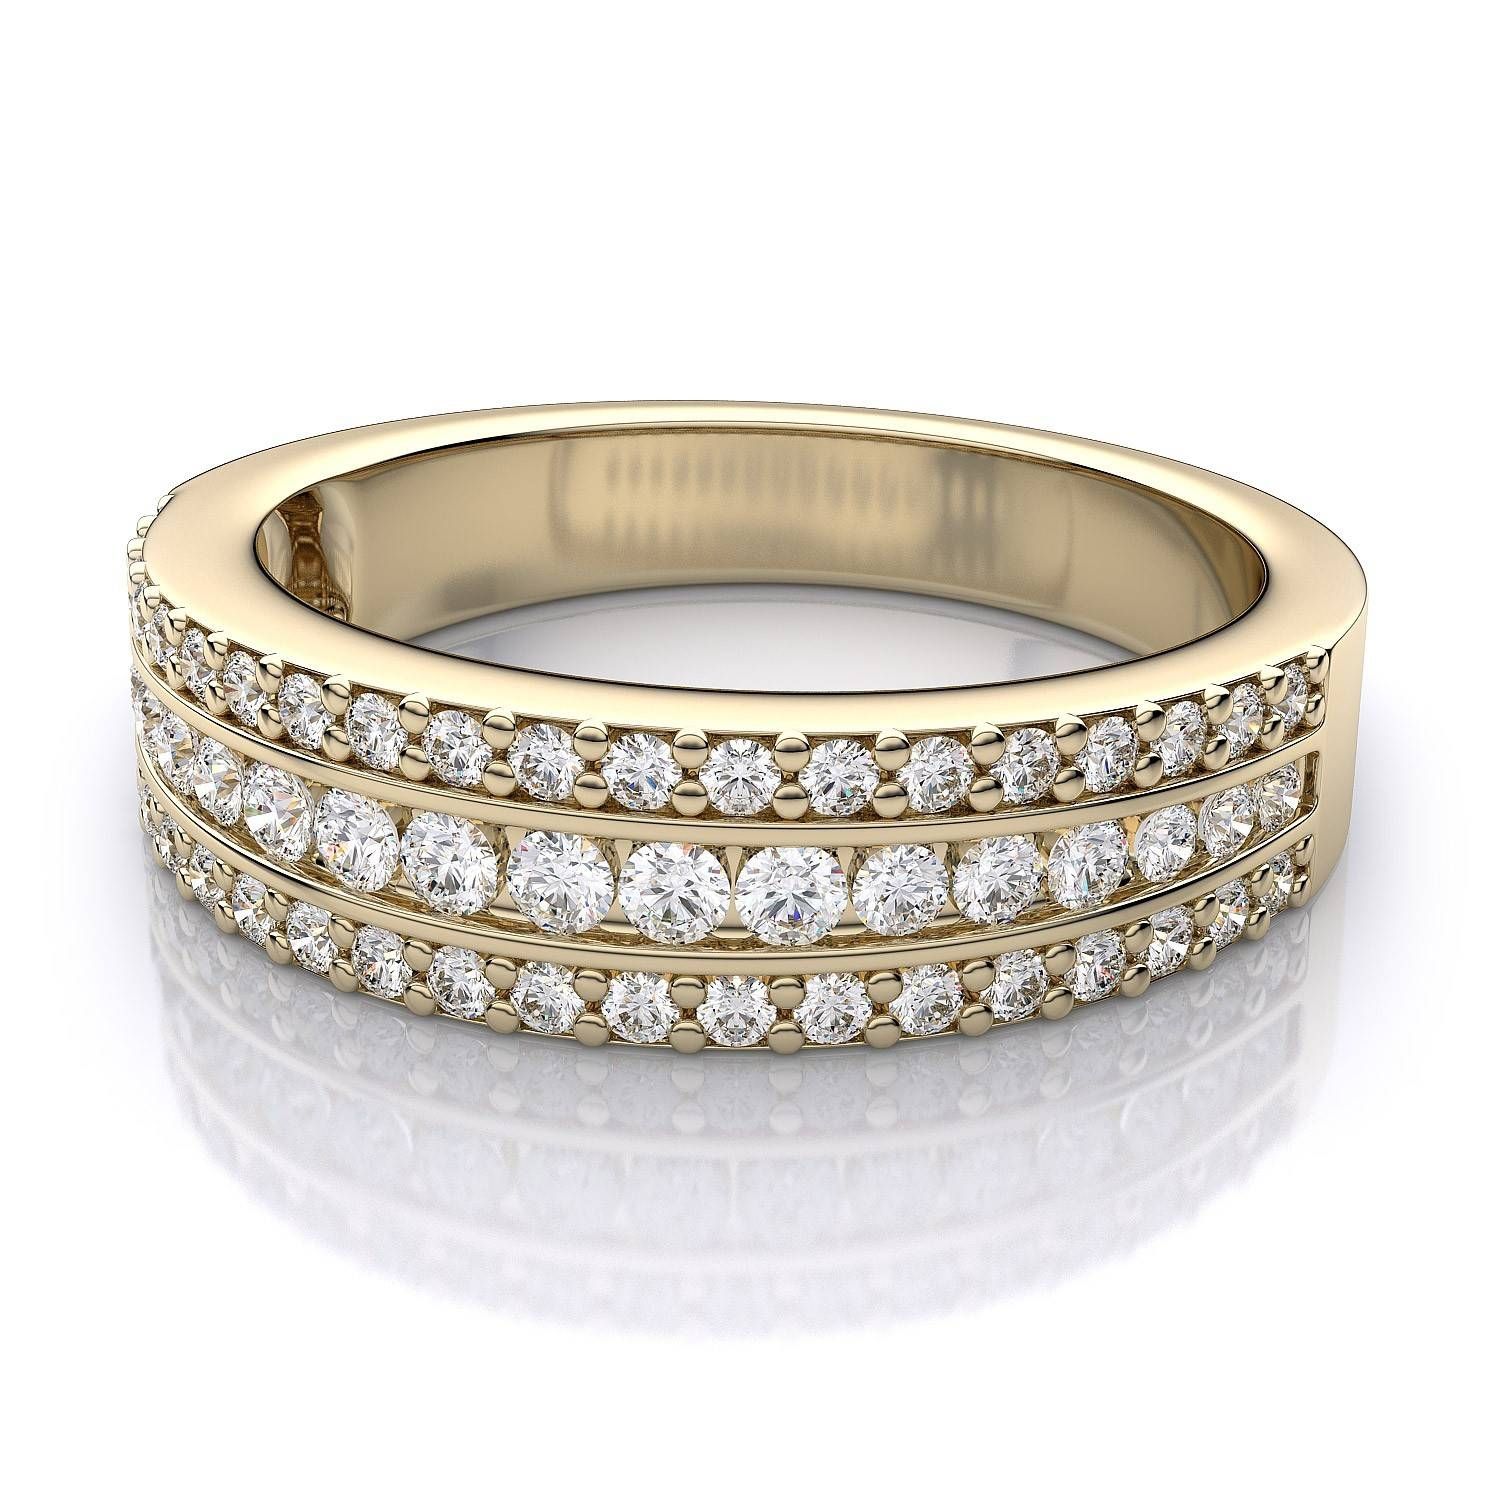 Wedding Rings : Yellow Gold Wedding Ring Sets His And Hers Yellow Within Anniversary Wedding Bands Sets (View 15 of 15)